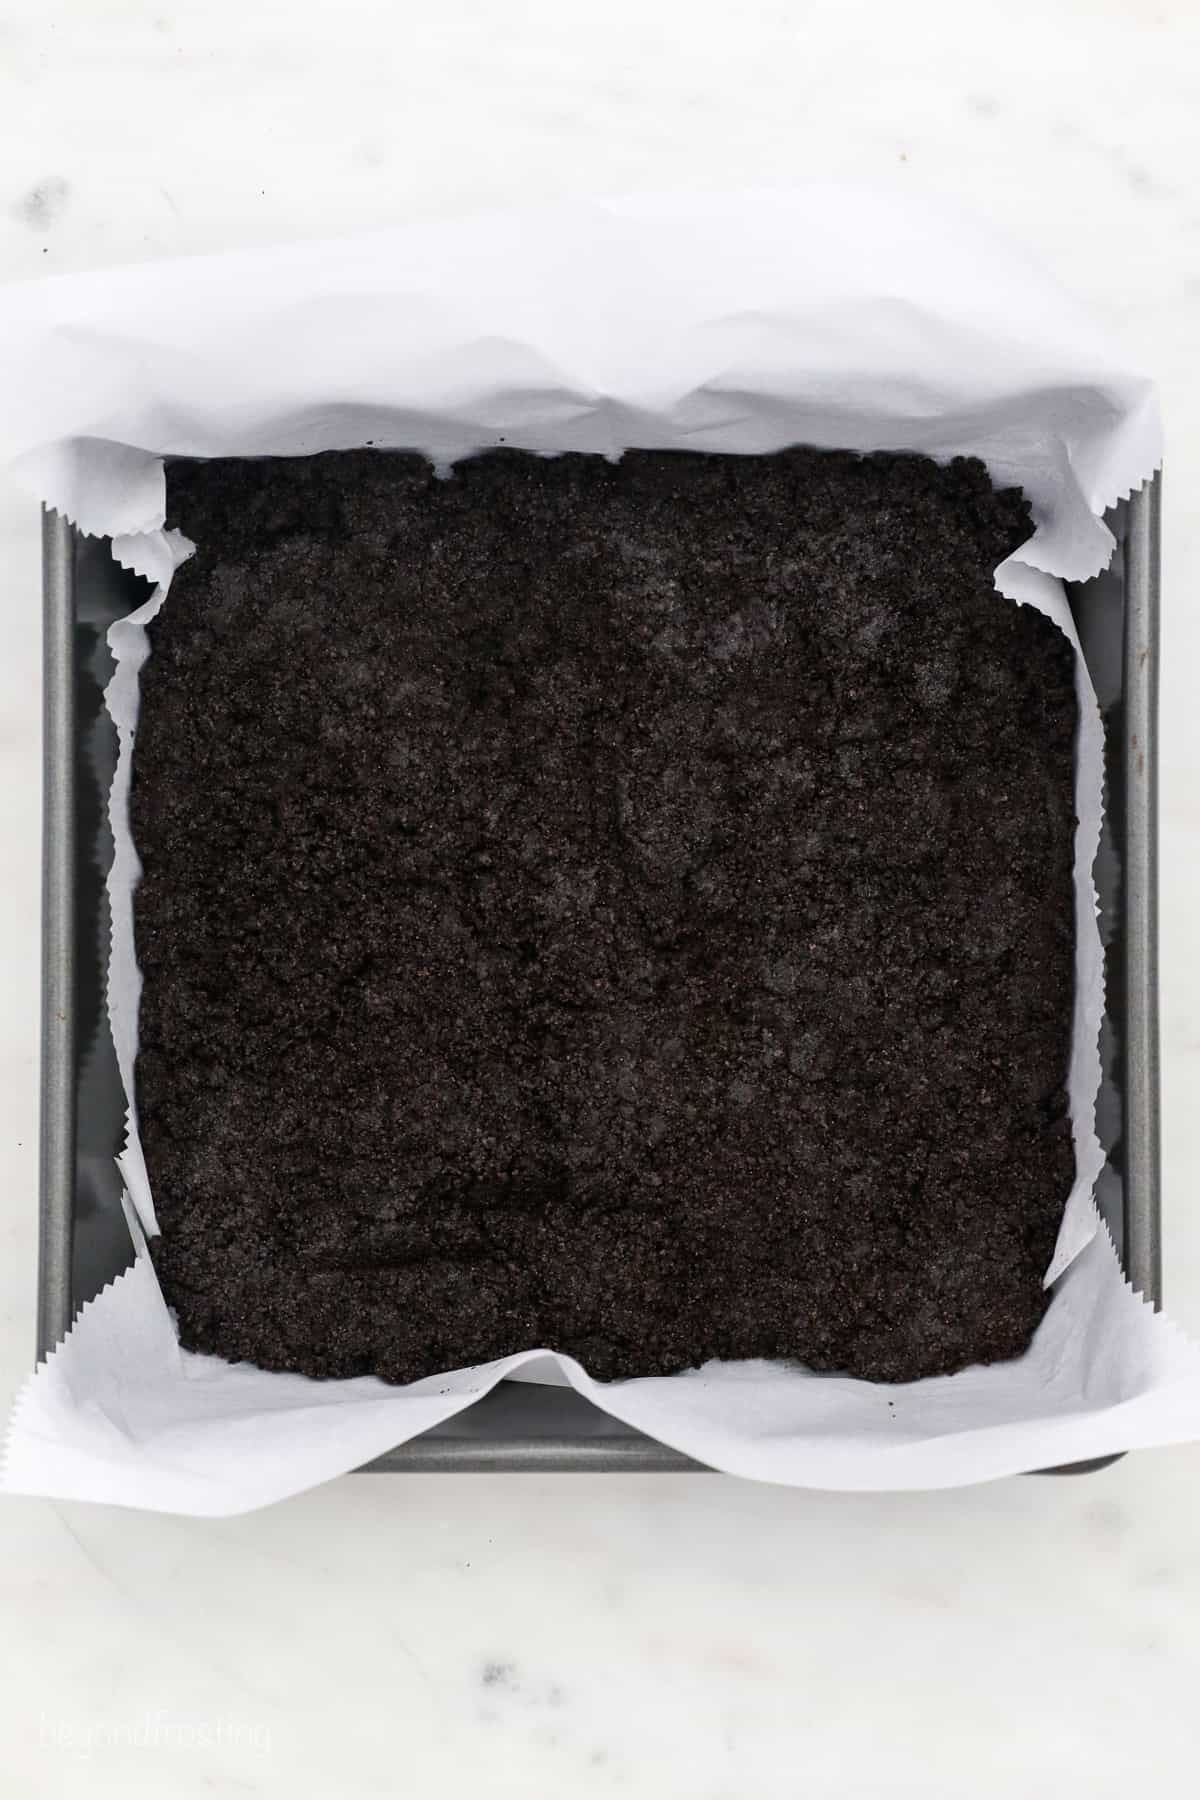 Oreo crust pressed into the bottom of a square baking pan lined with parchment paper.